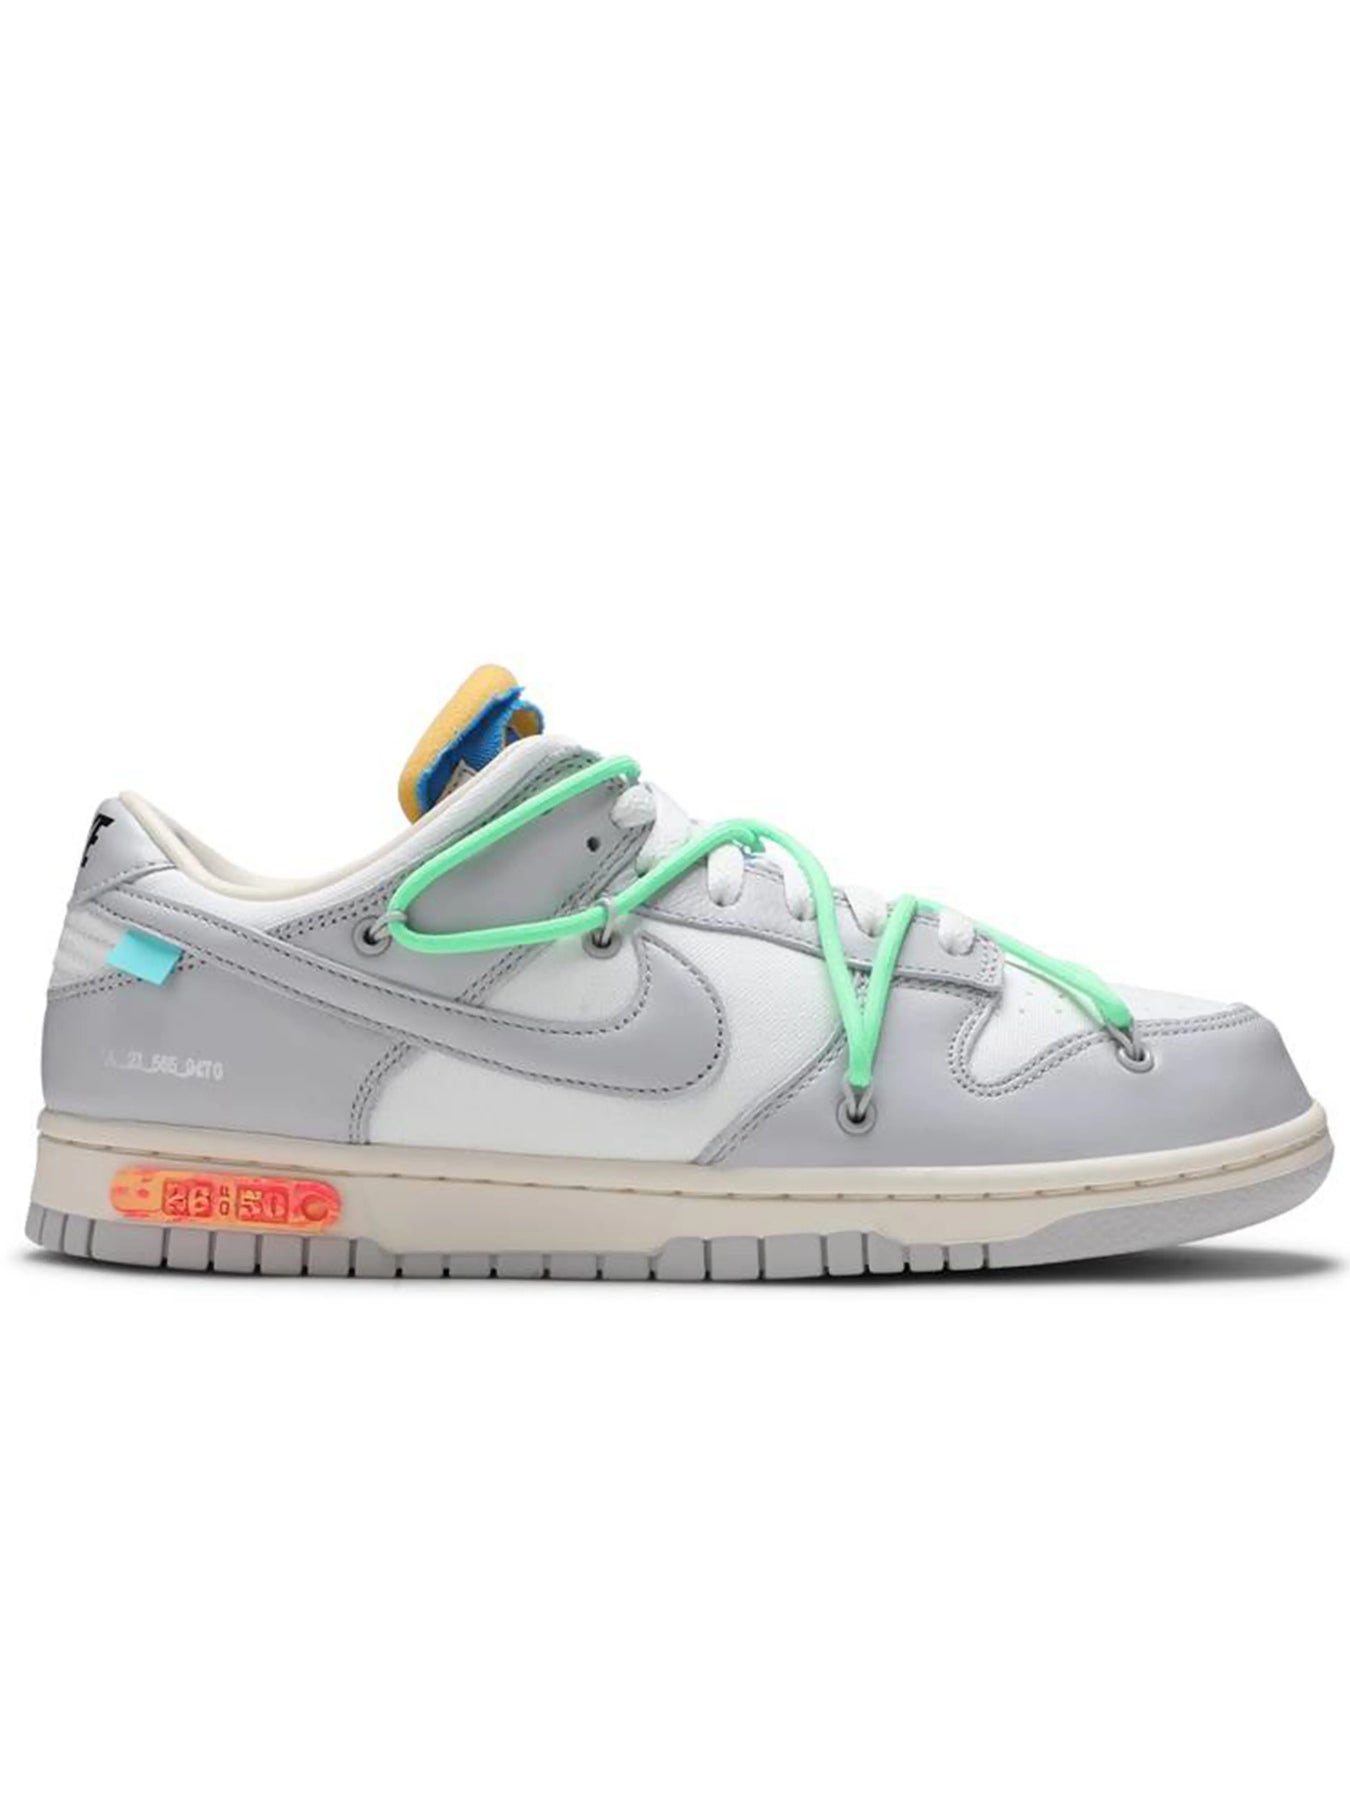 Nike Dunk Low Off-White Lot 26 in Auckland, New Zealand - Prior